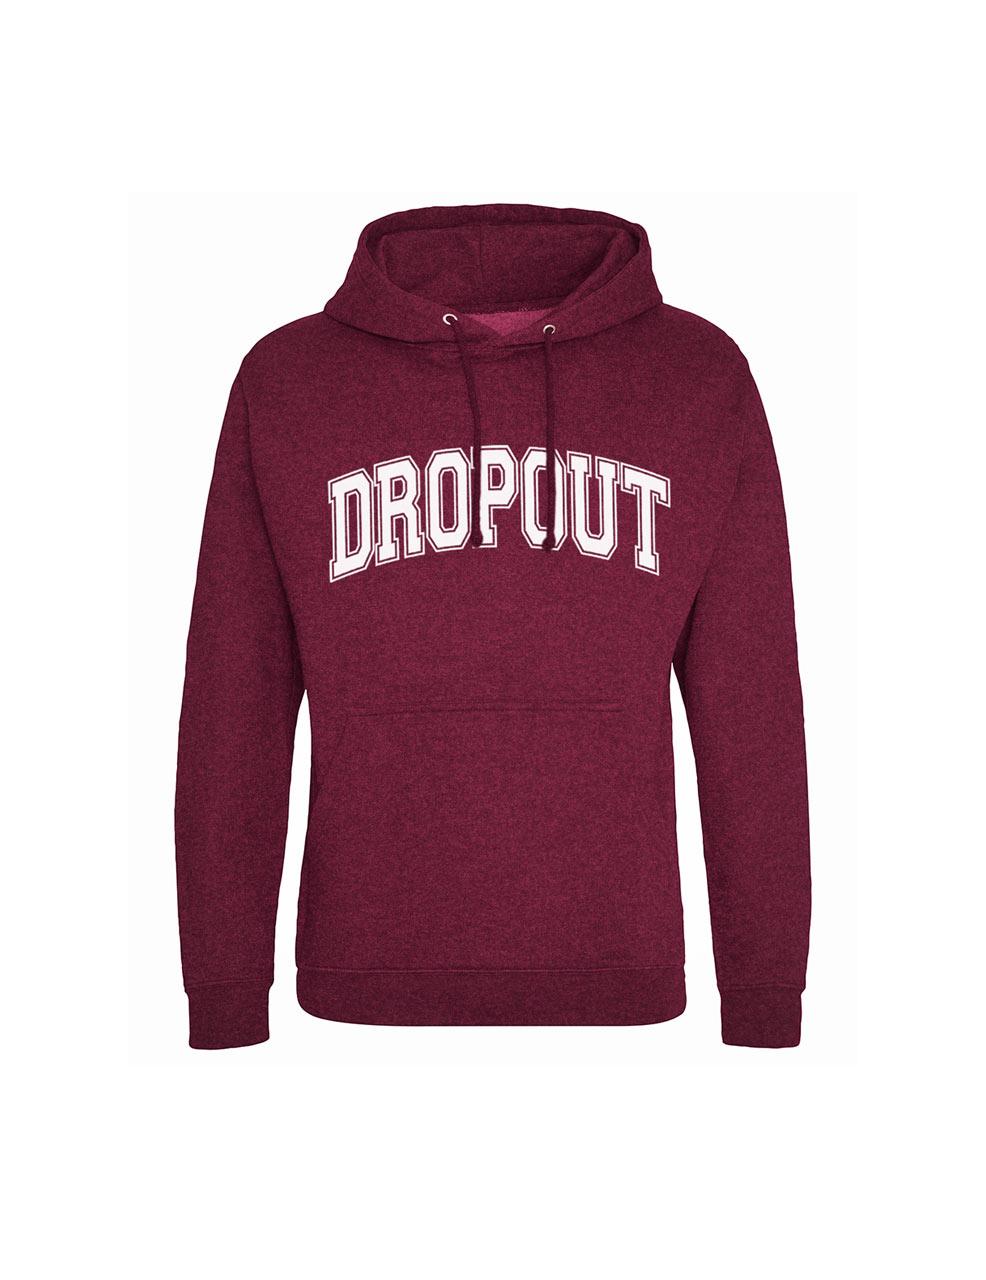 College drop out unisex pullover hoodie in burgundy